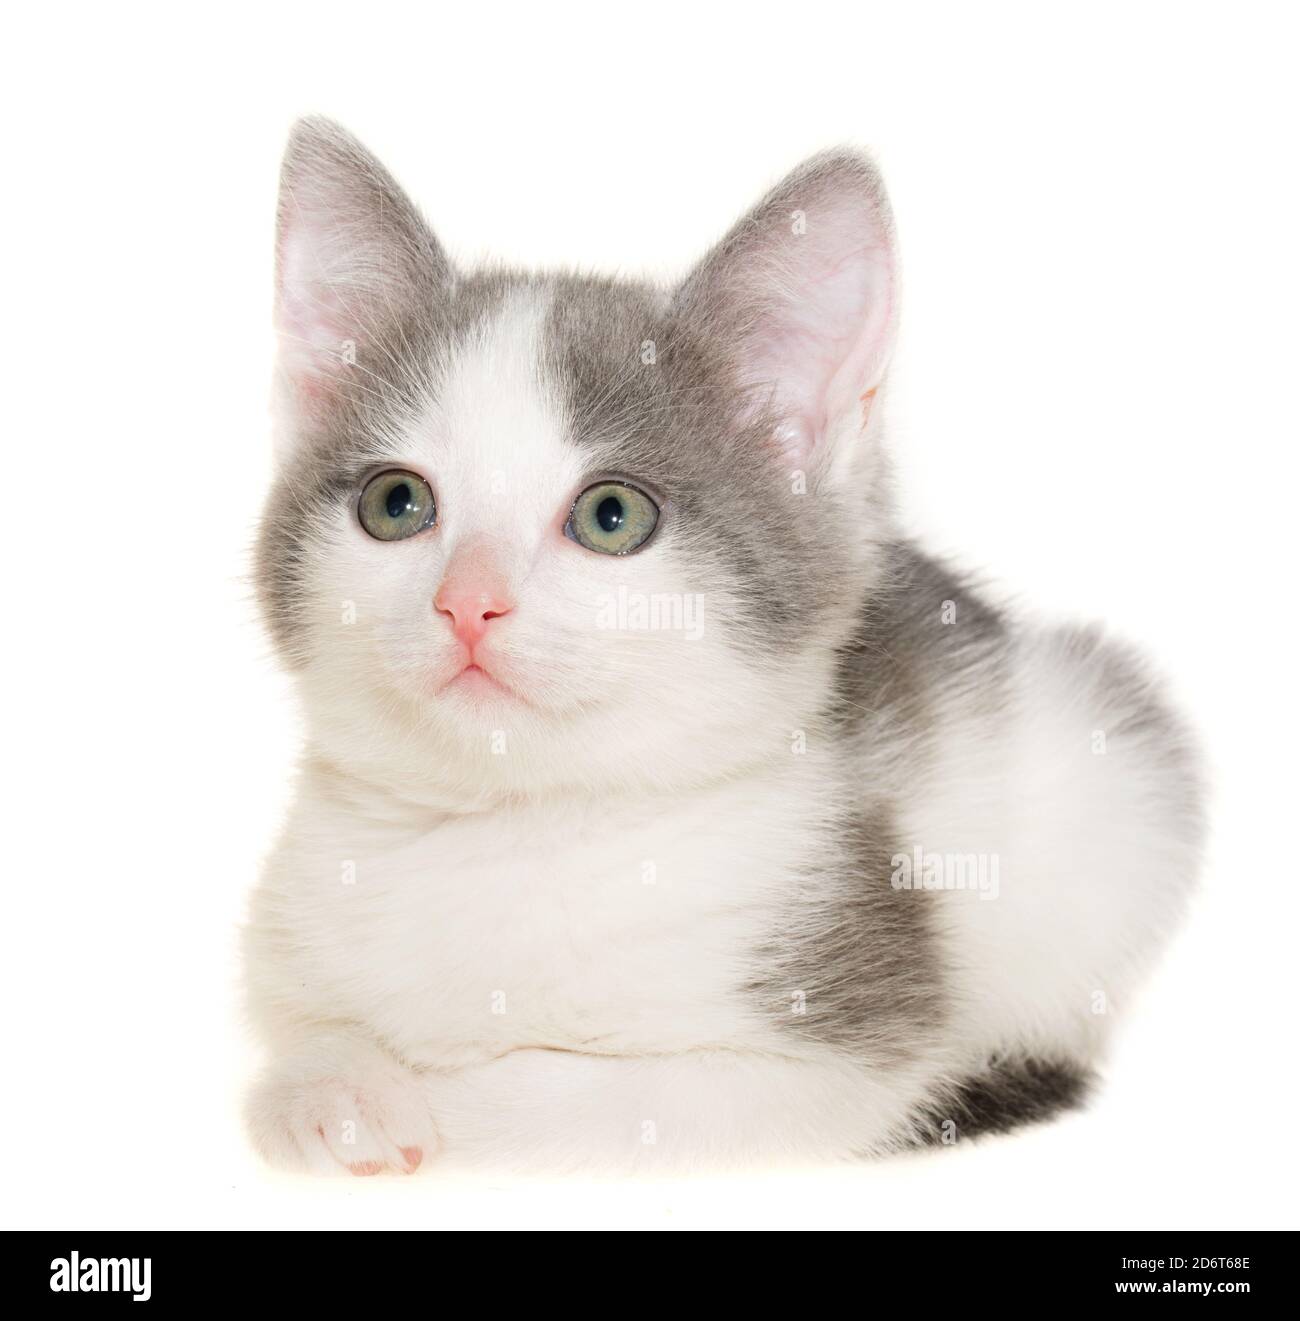 Bicolor gray-white small shorthair kitten lie isolated on a white background. Stock Photo